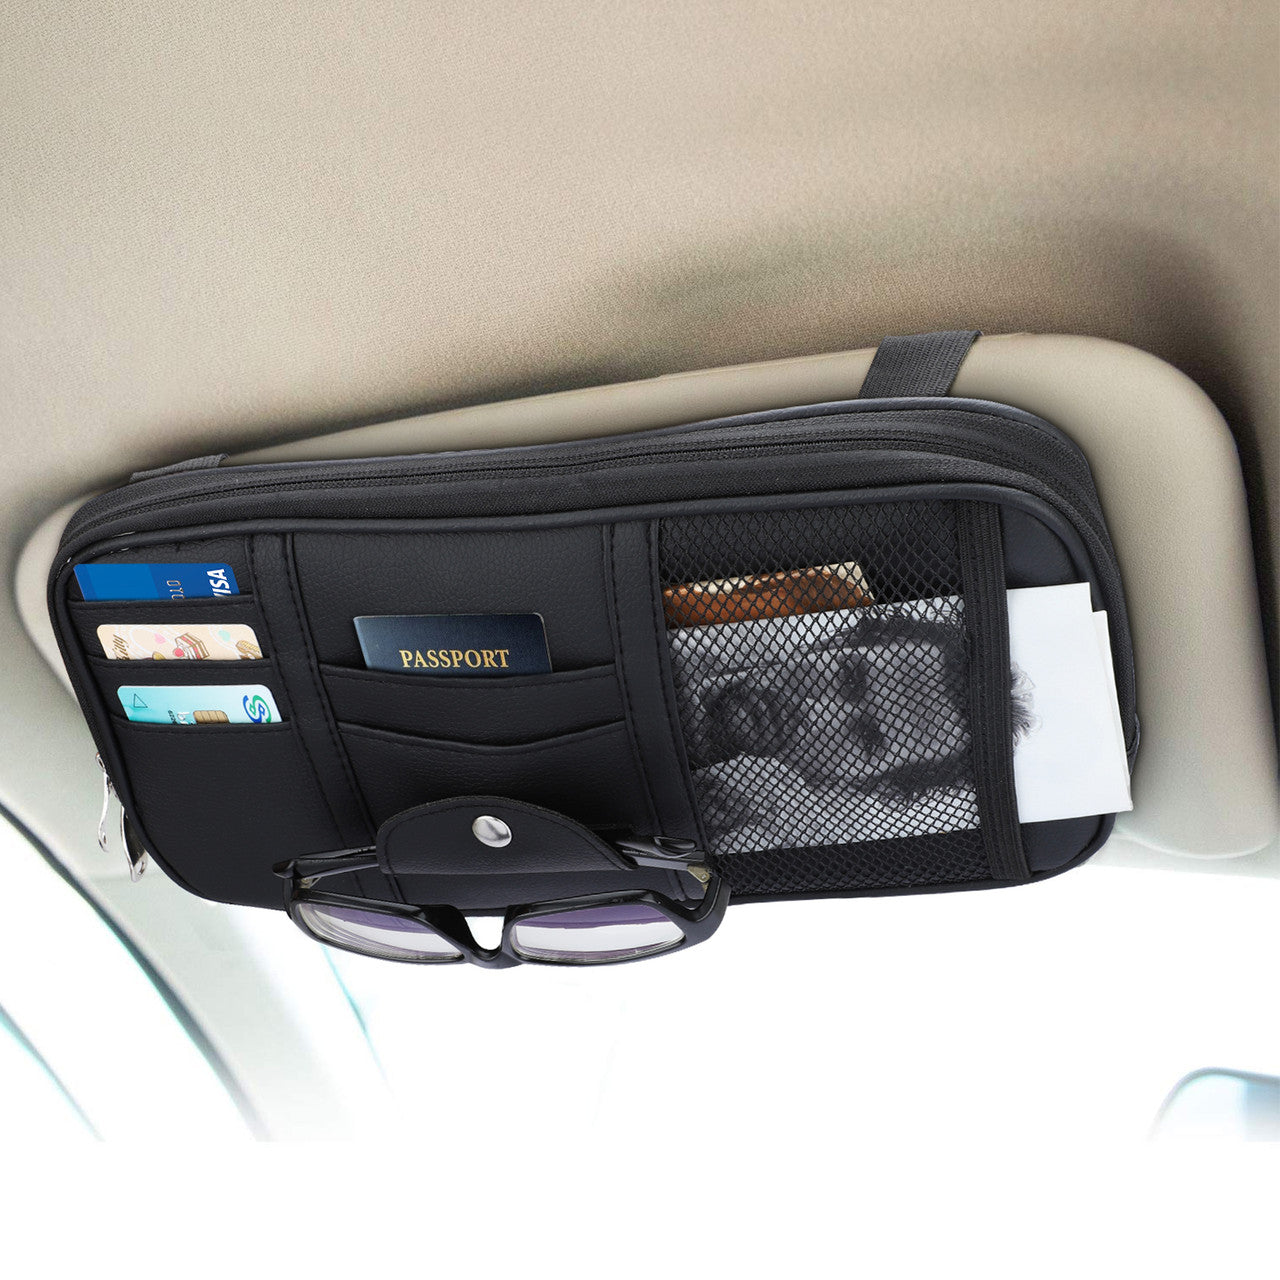 Car Sun Visor Organizer, Auto Accessories Document Holder - Car, Truck, SUV Registration & Insurance Storage Pouch - Road Trip Essential Gift for Any Driver